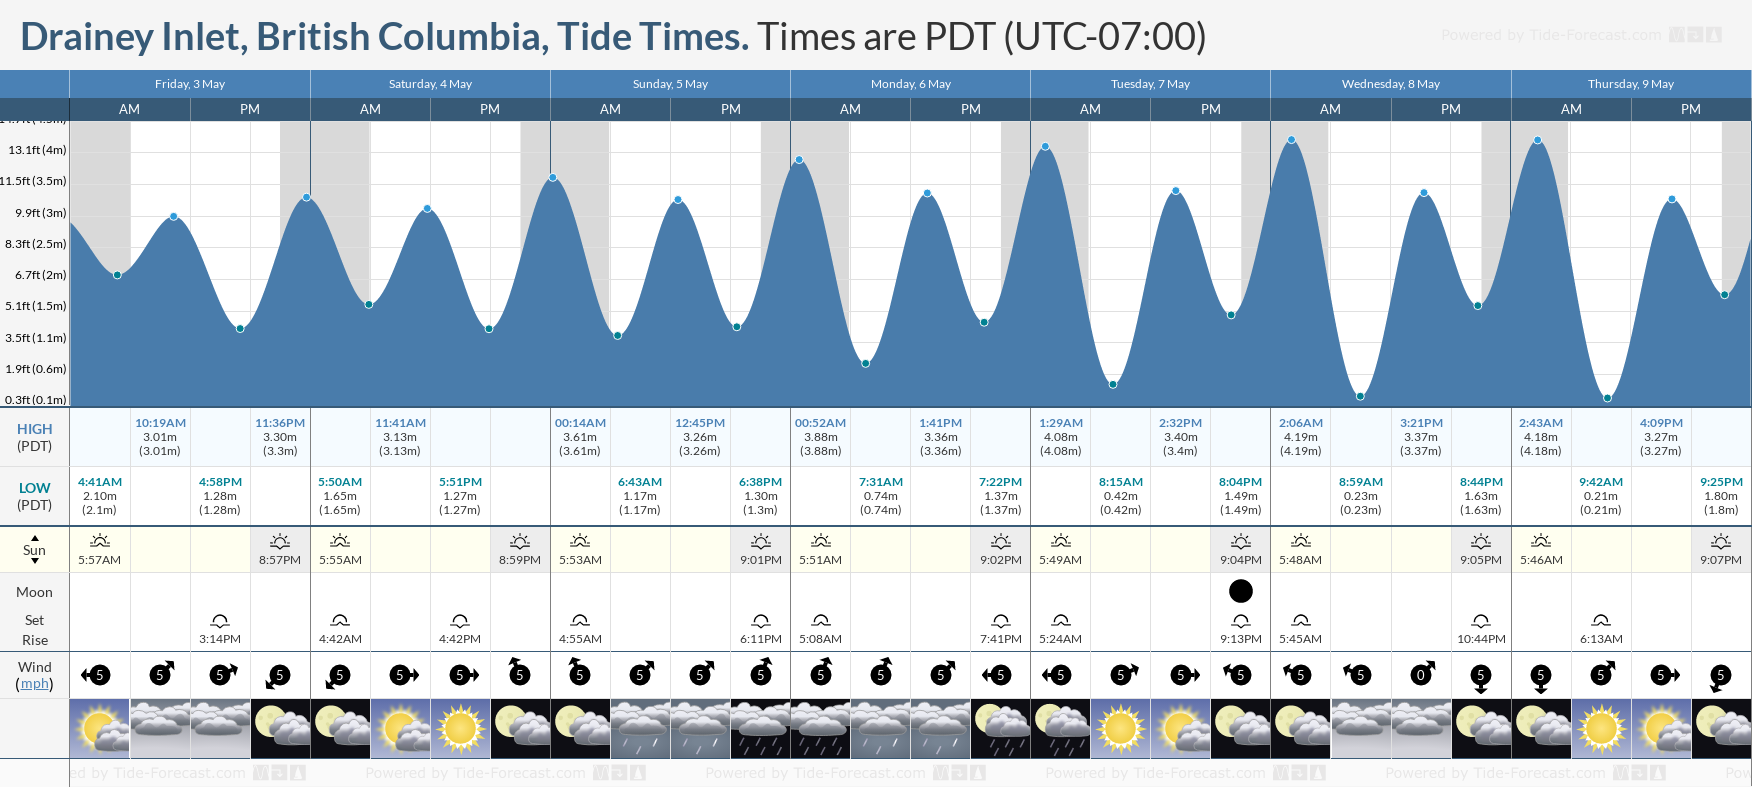 Drainey Inlet, British Columbia Tide Chart including high and low tide times for the next 7 days